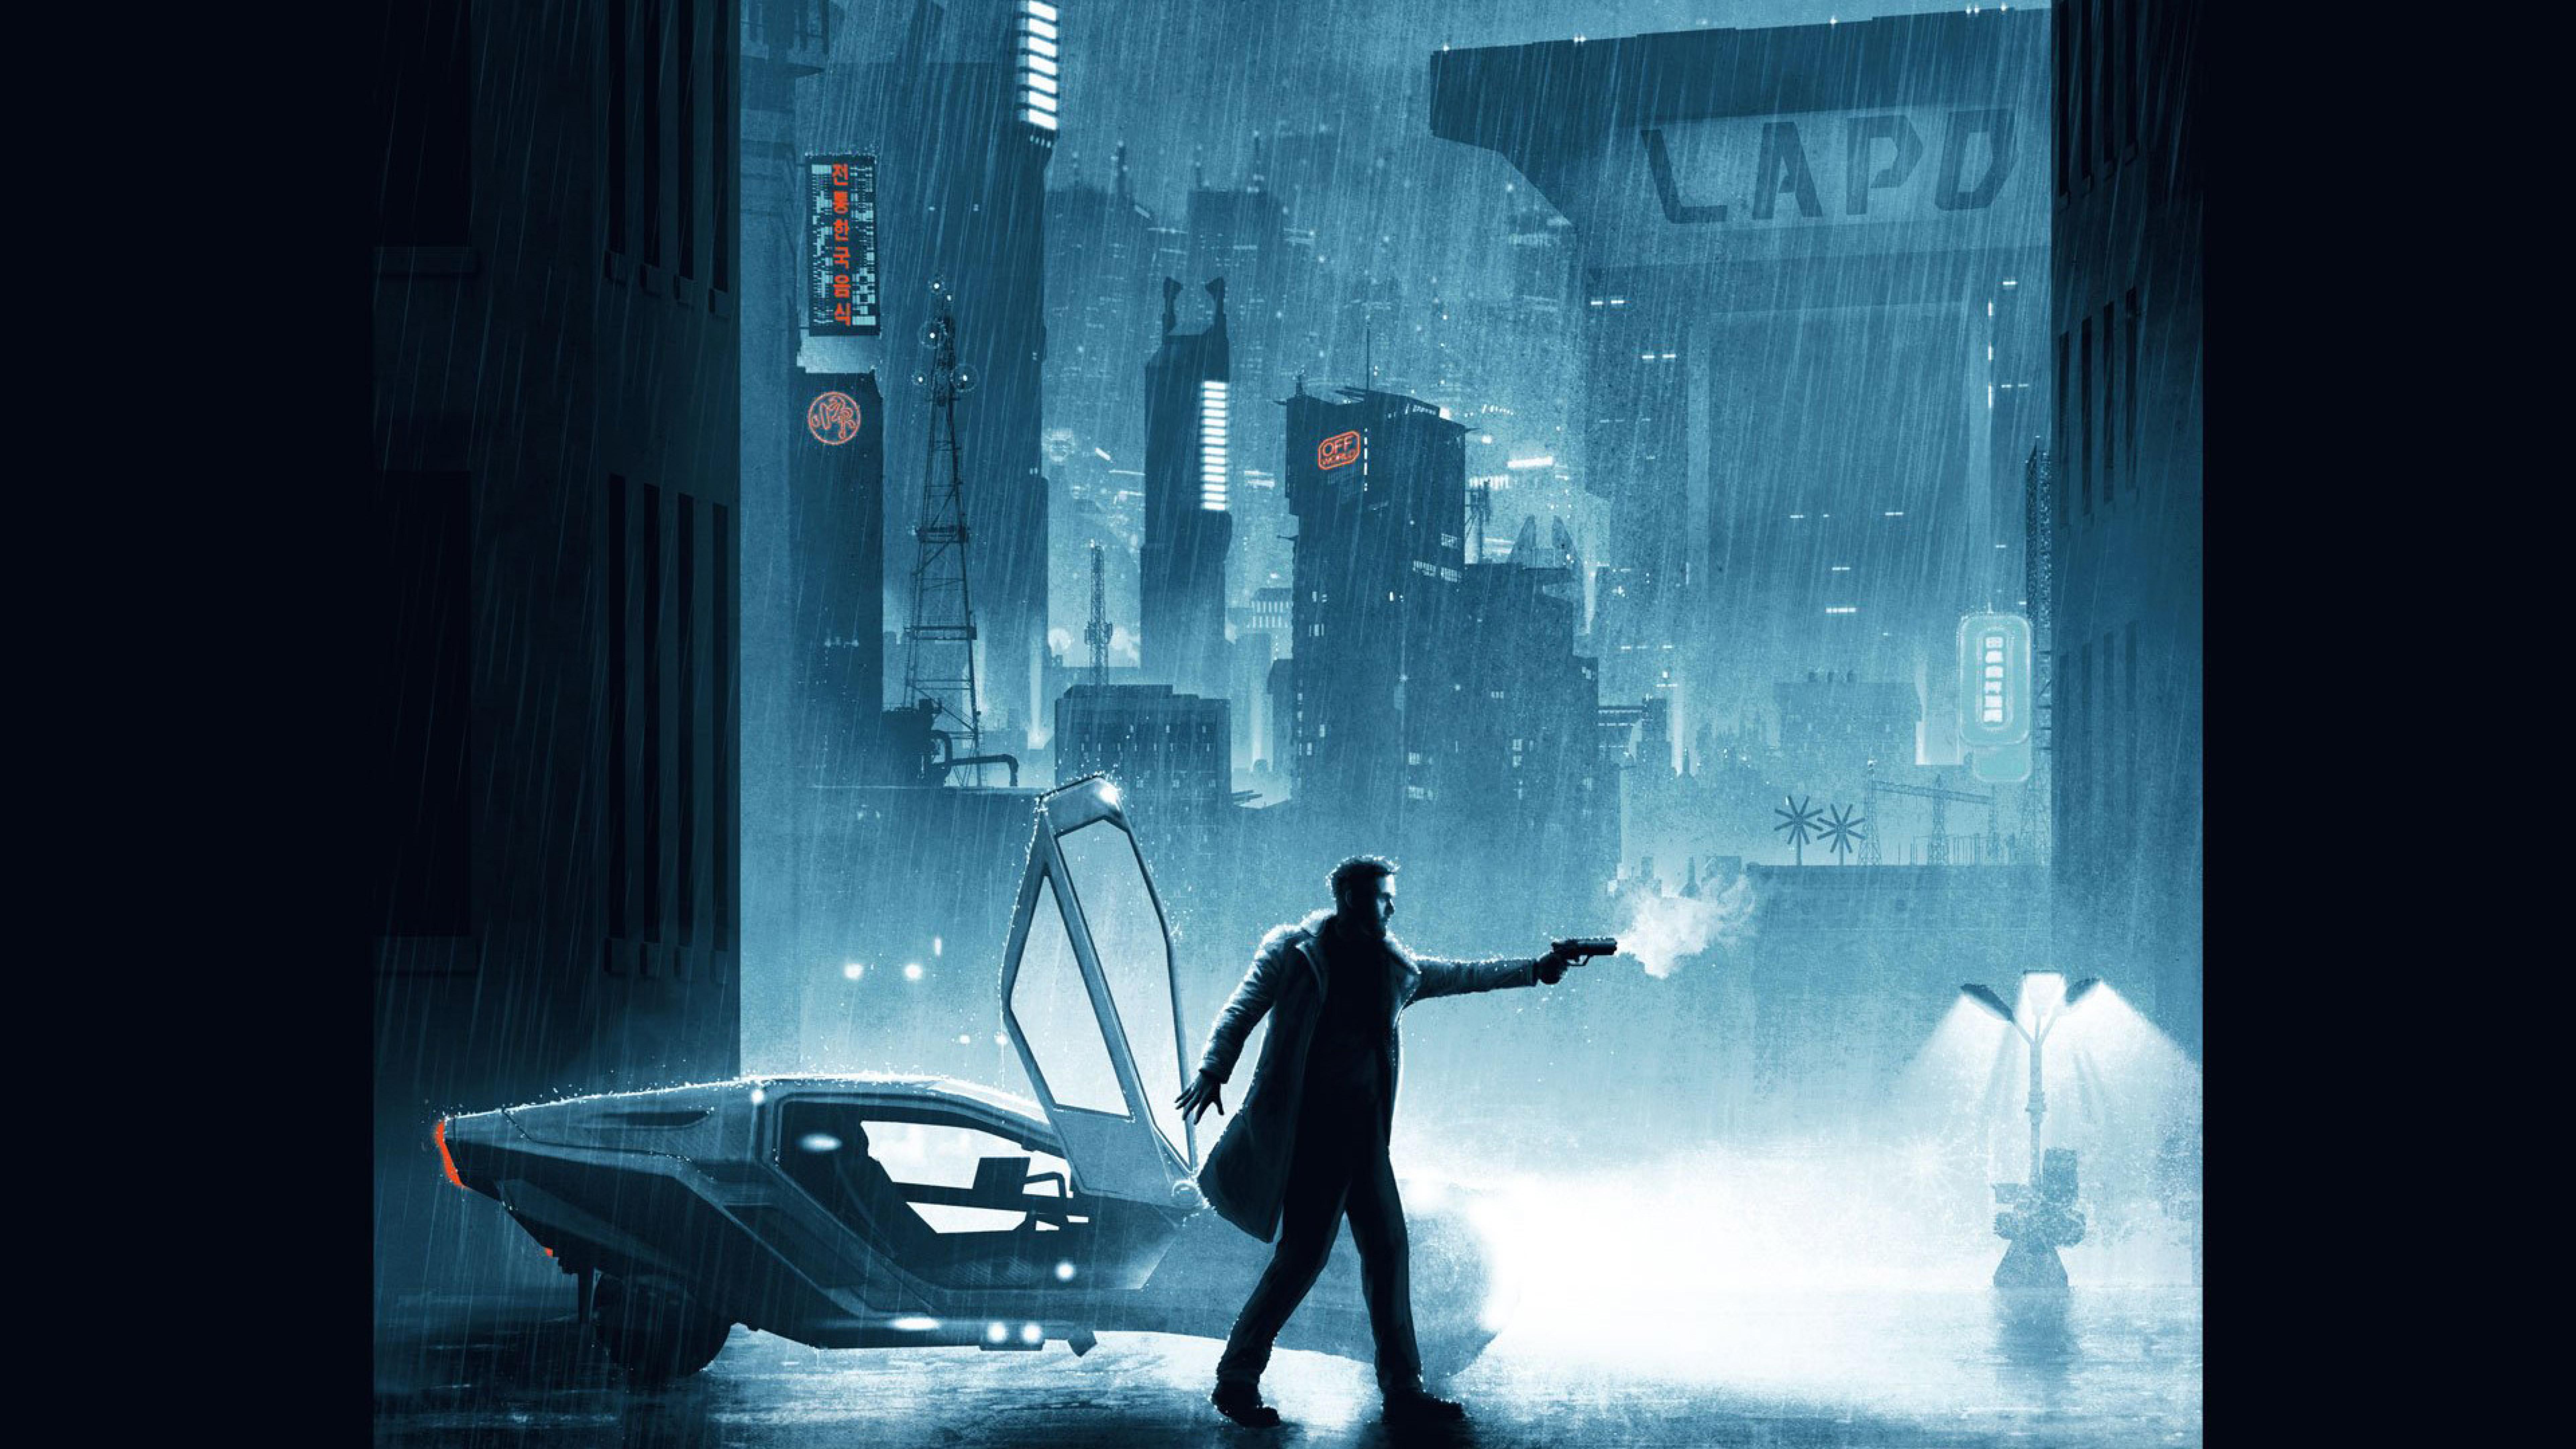 7680 x 4320 · jpeg - Blade Runner 2049 Image - ID: 167115 - Image Abyss